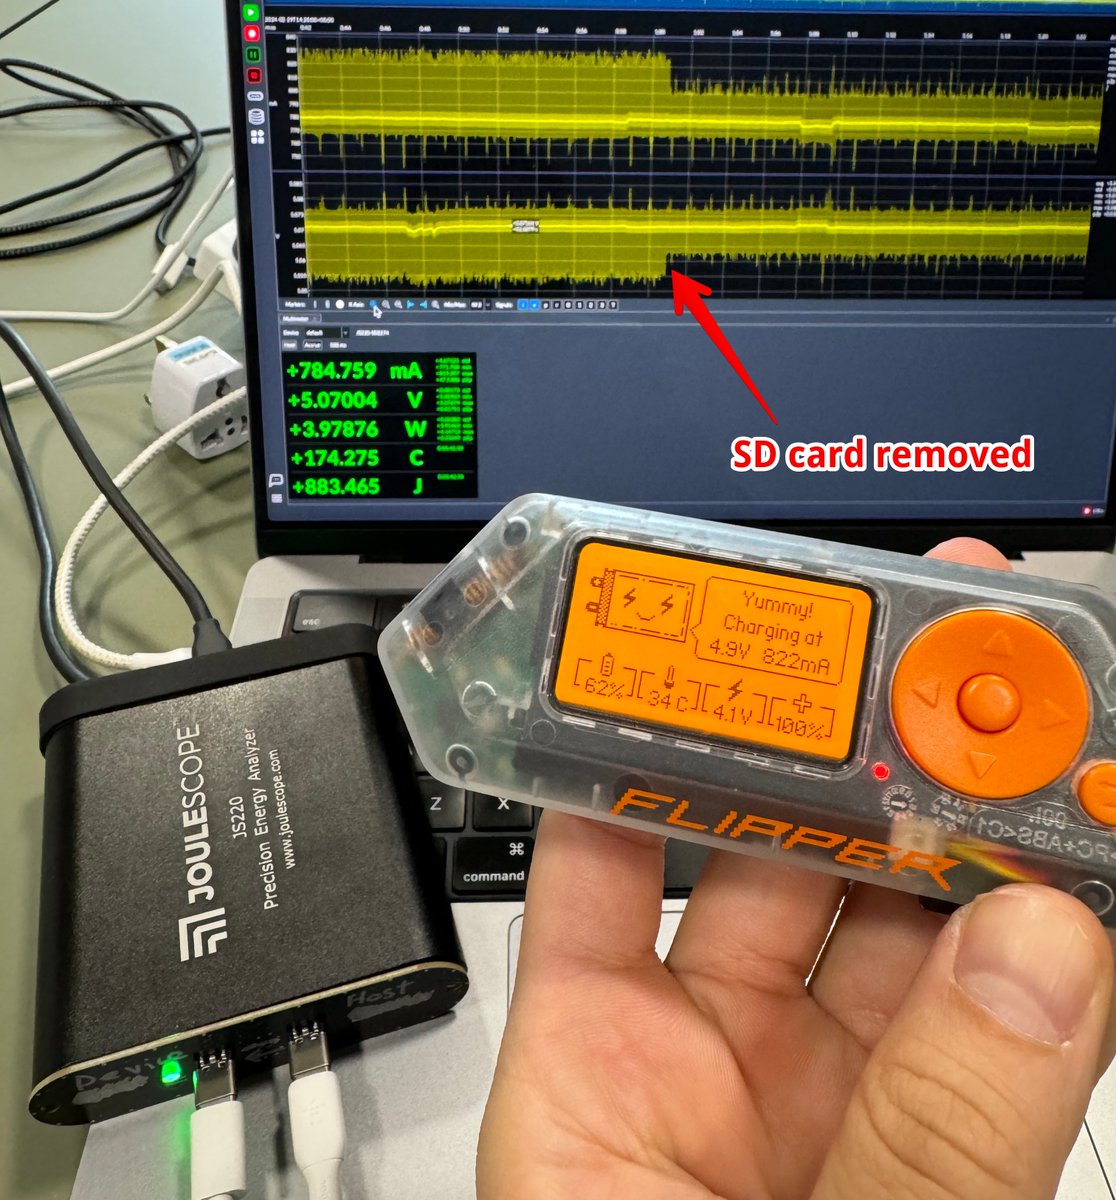 @joulescope @alvaroprieto Thank you all for a wonderful tool! Joulescope works like a charm with @alvaroprieto's USB-C front panel — on a photo, we can see the power consumption drop when the SD card was removed. 

It's much more convenient than using an oscilloscope for this task. We think your product